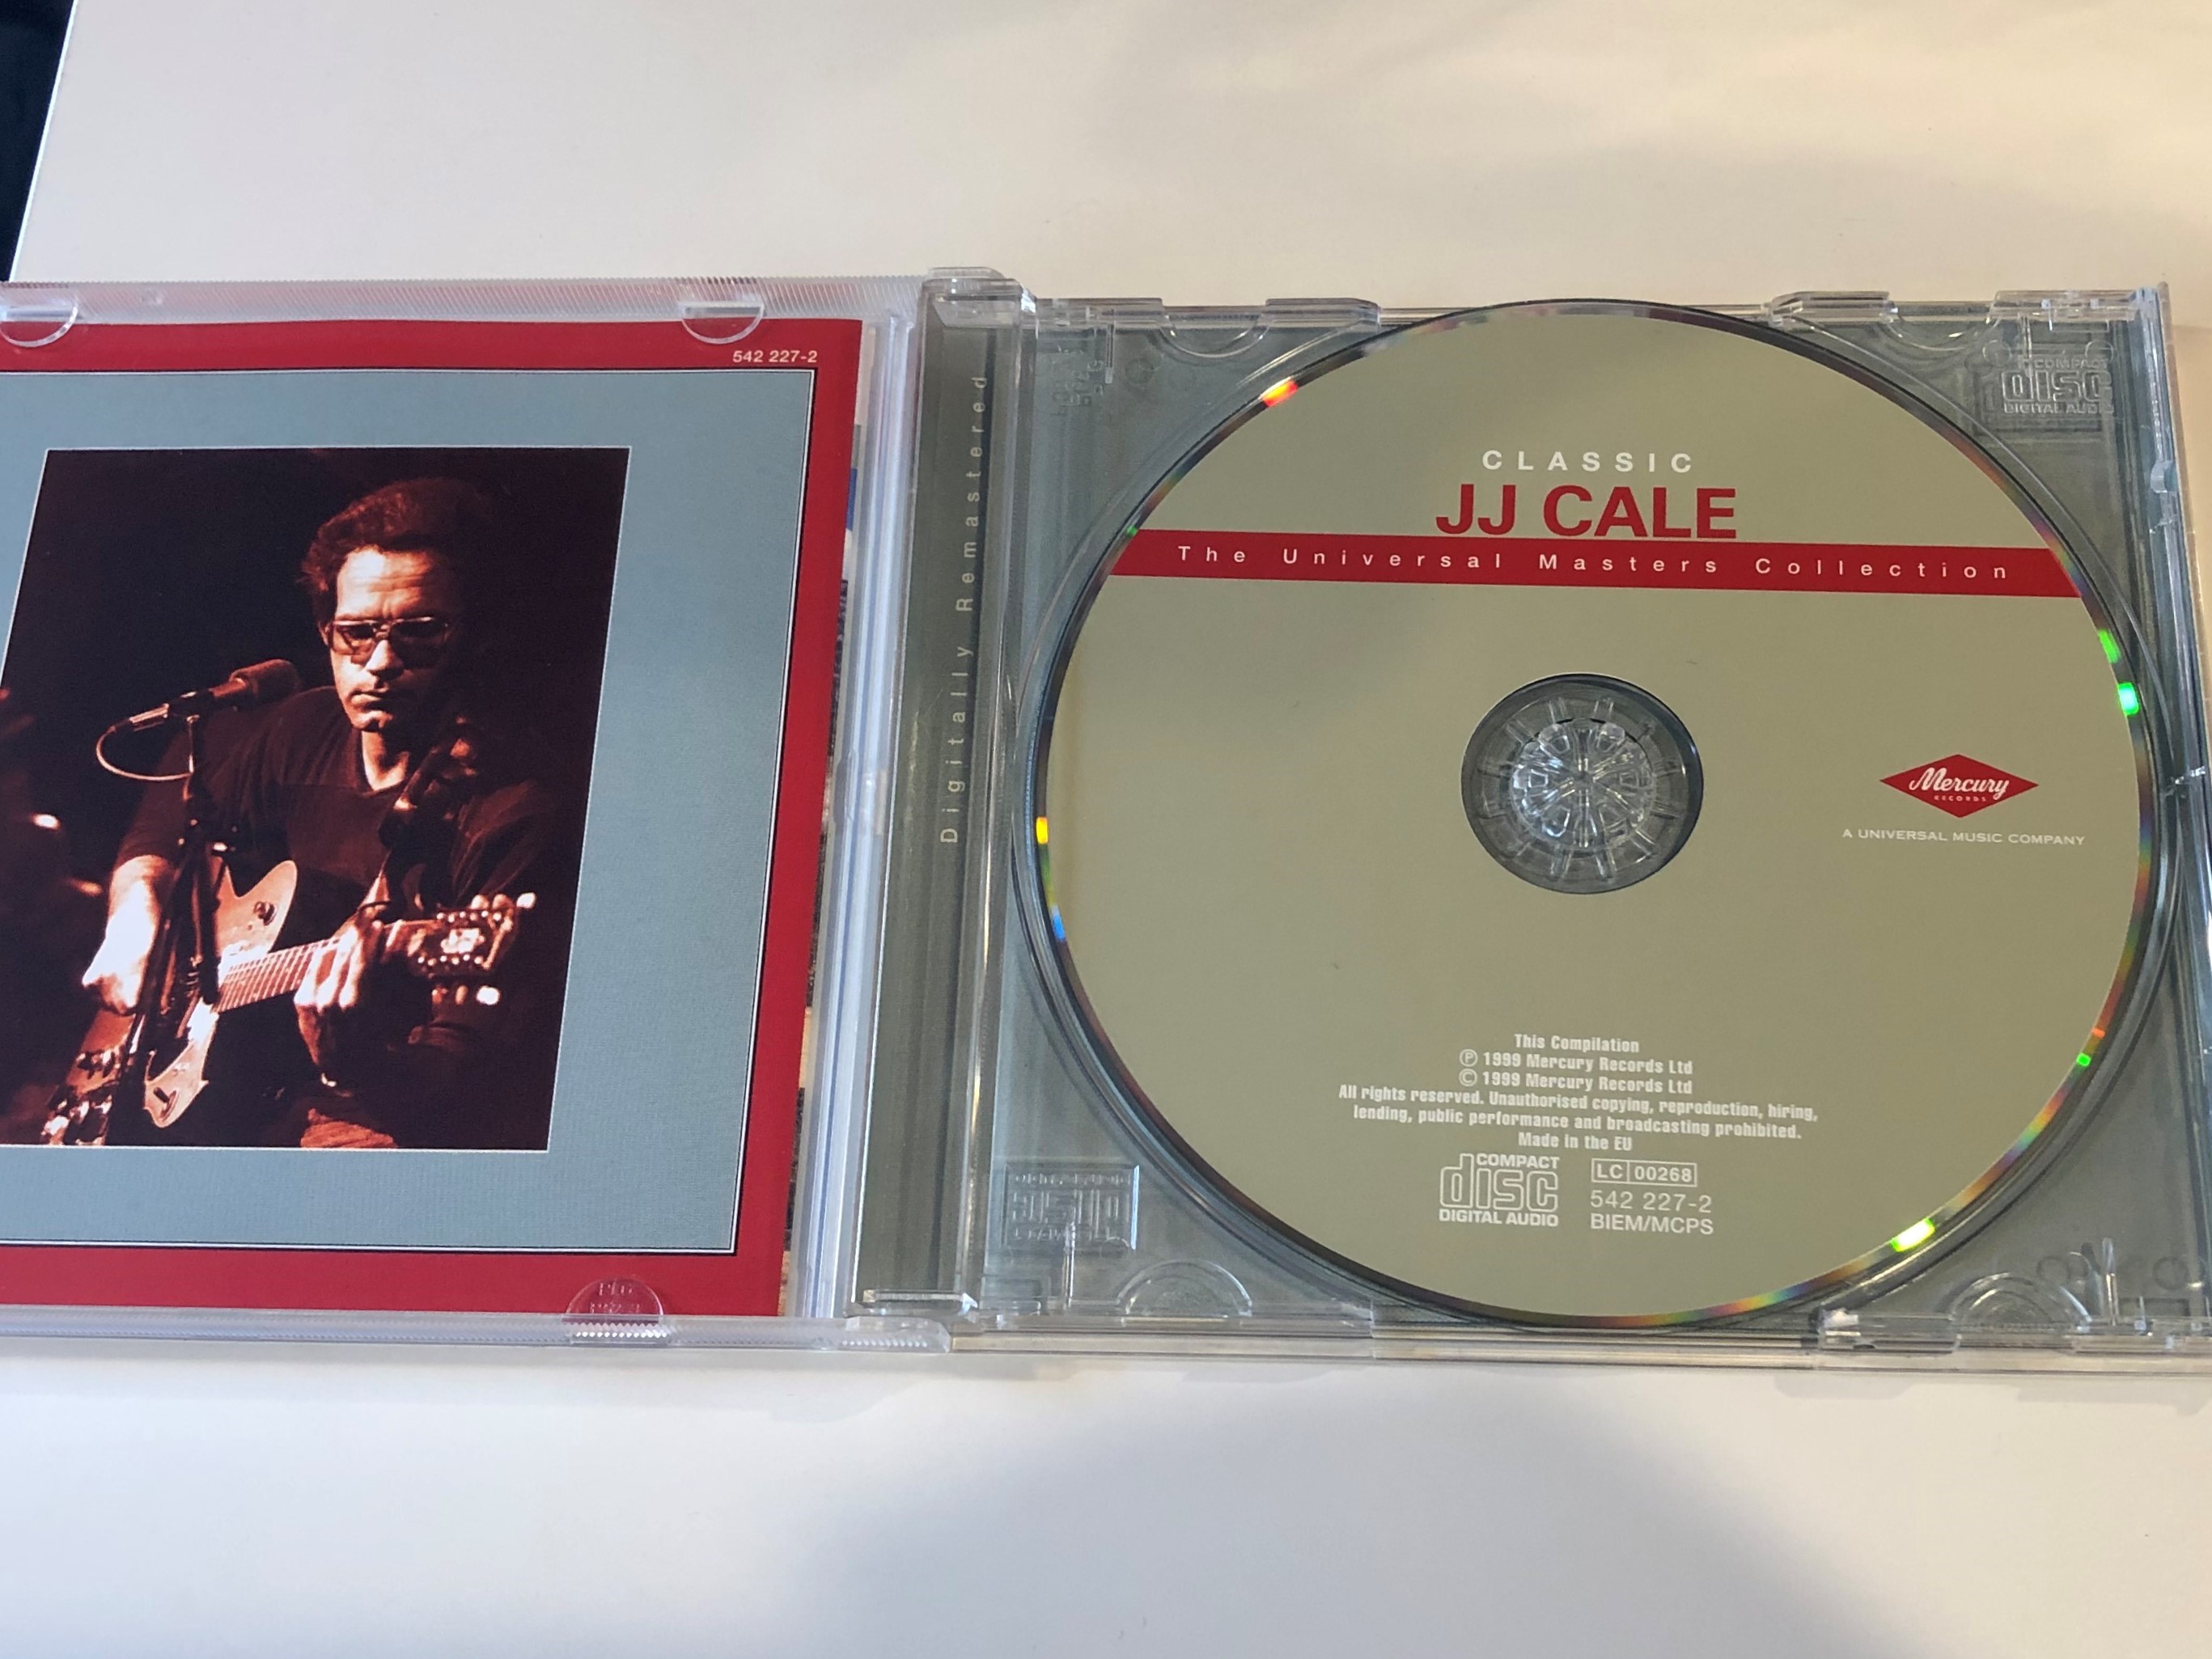 classic-jj-cale-the-universal-masters-collection-mercury-audio-cd-1999-542-227-2-2-.jpg